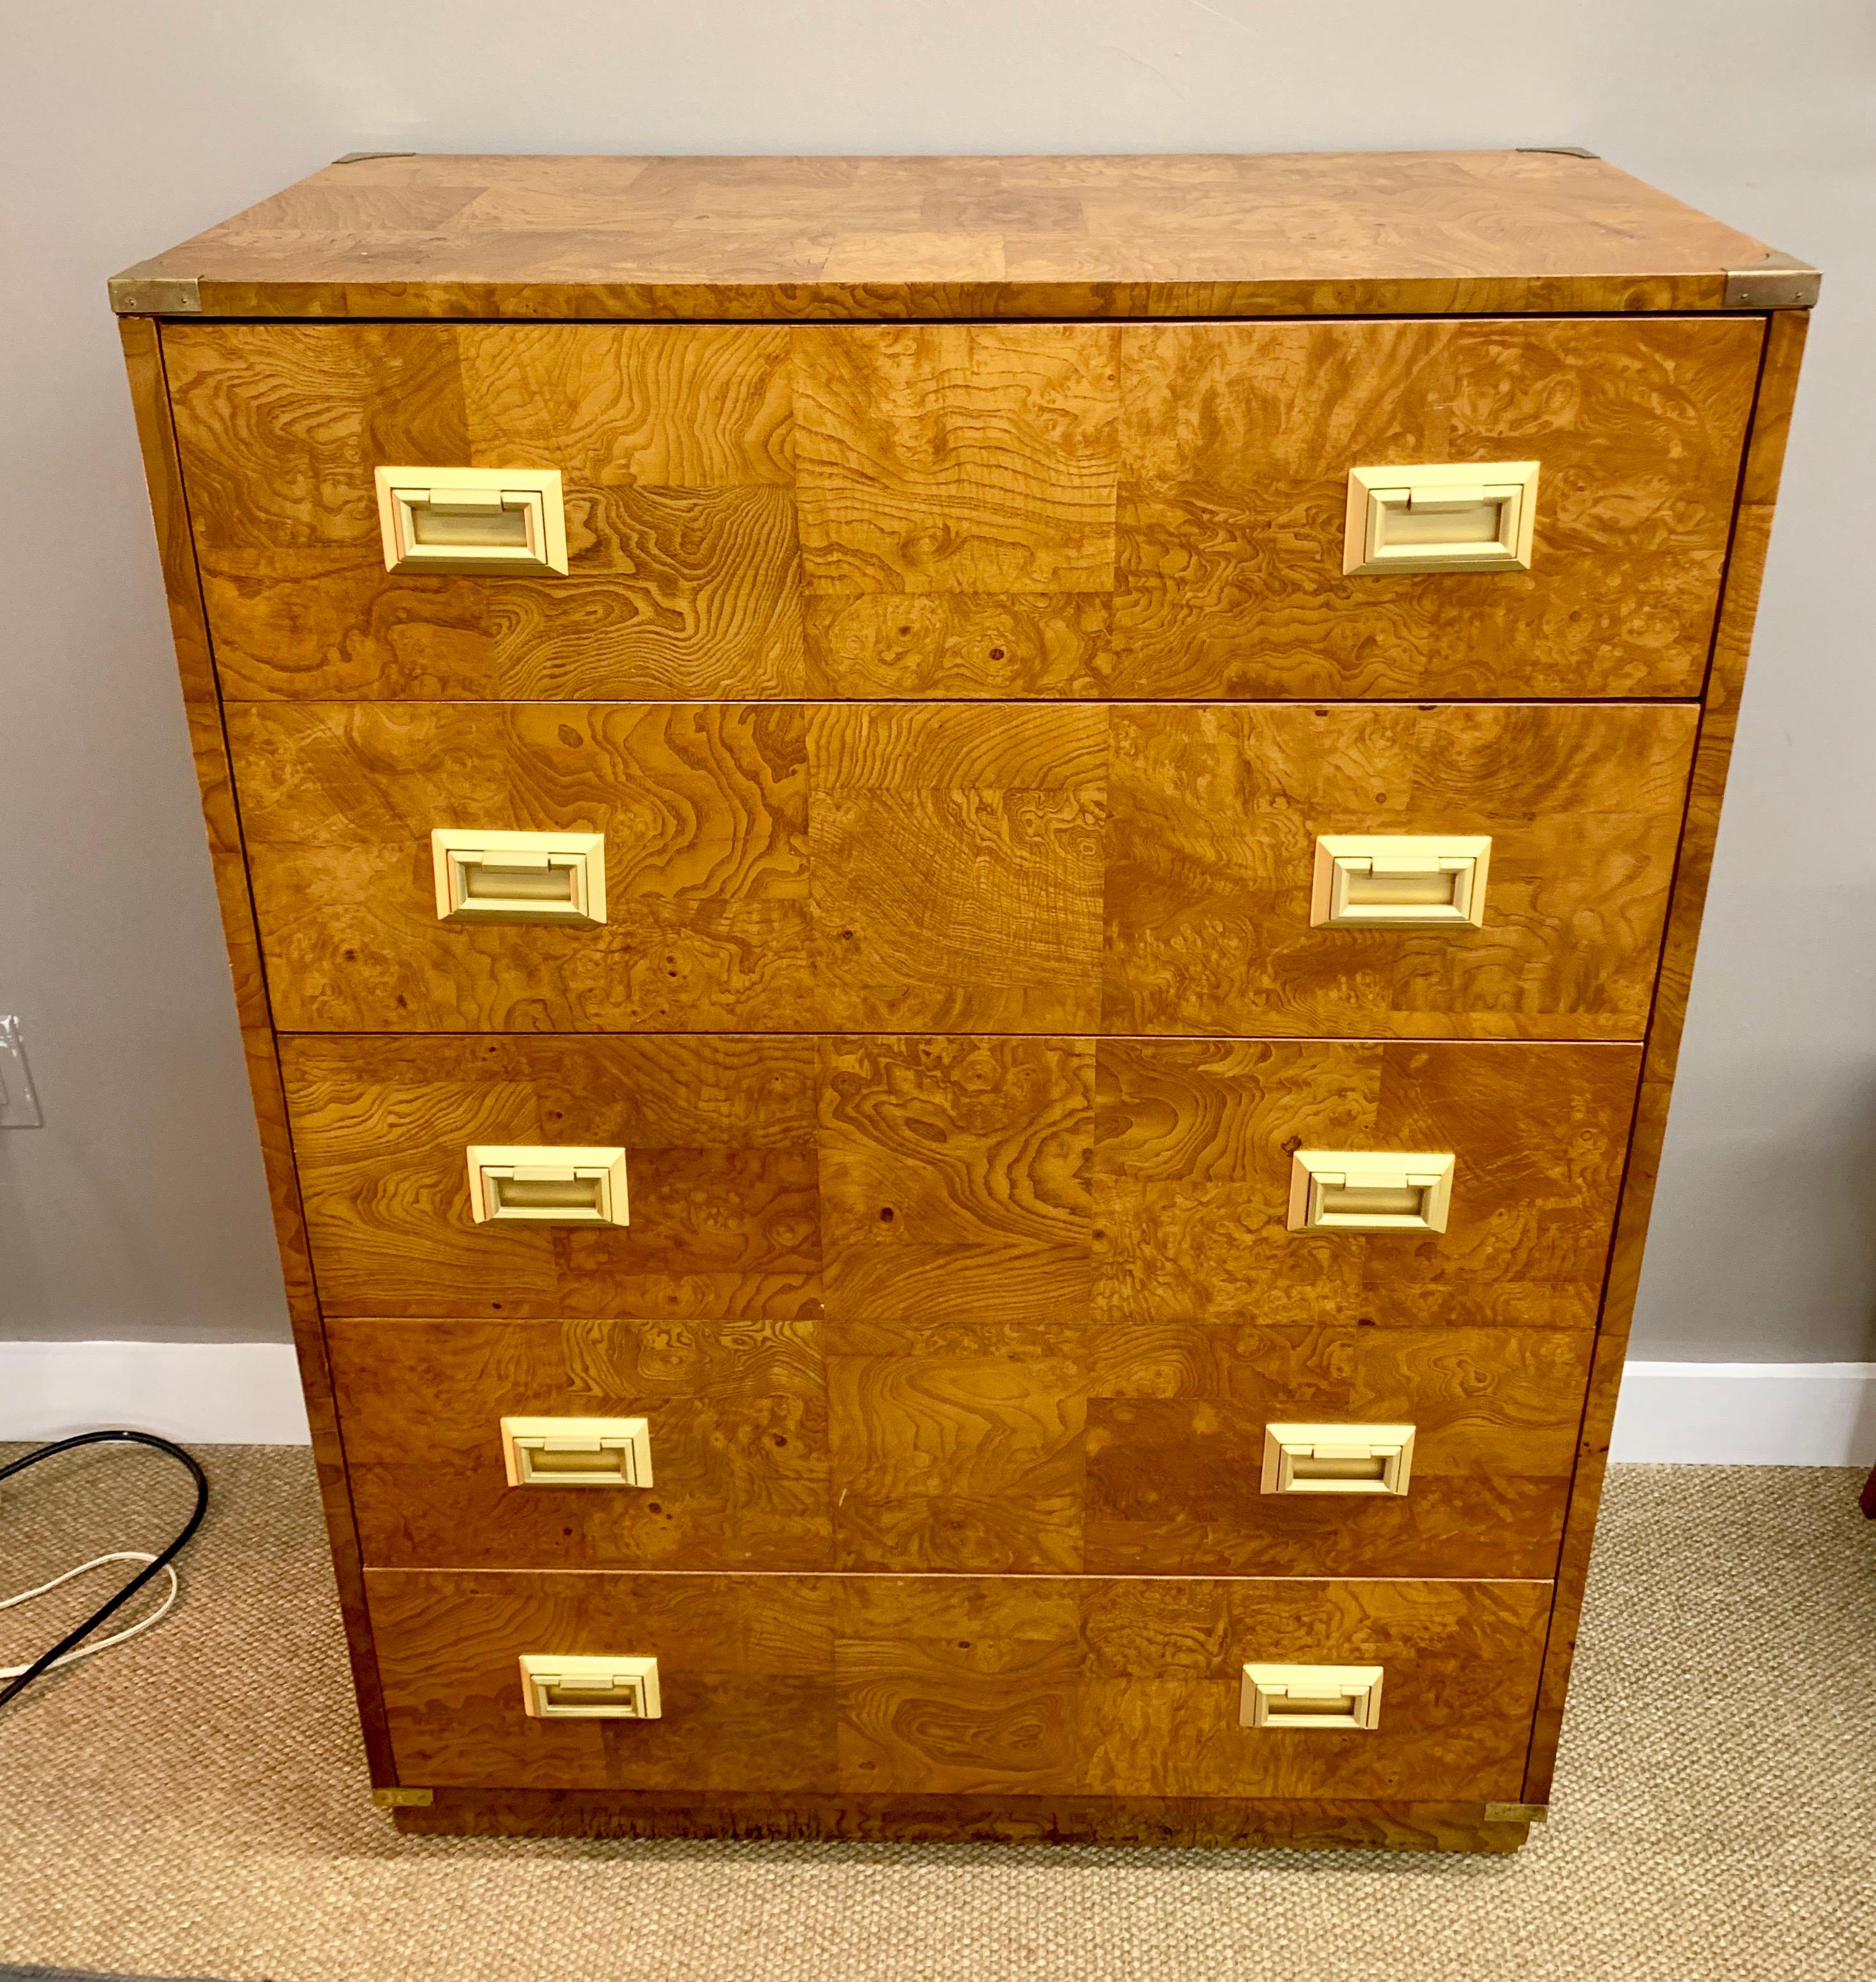 Rare Bernhardt tall campaign chest that features five drawers. Signed by manufacturer in the top drawer.
Burl with veneer.